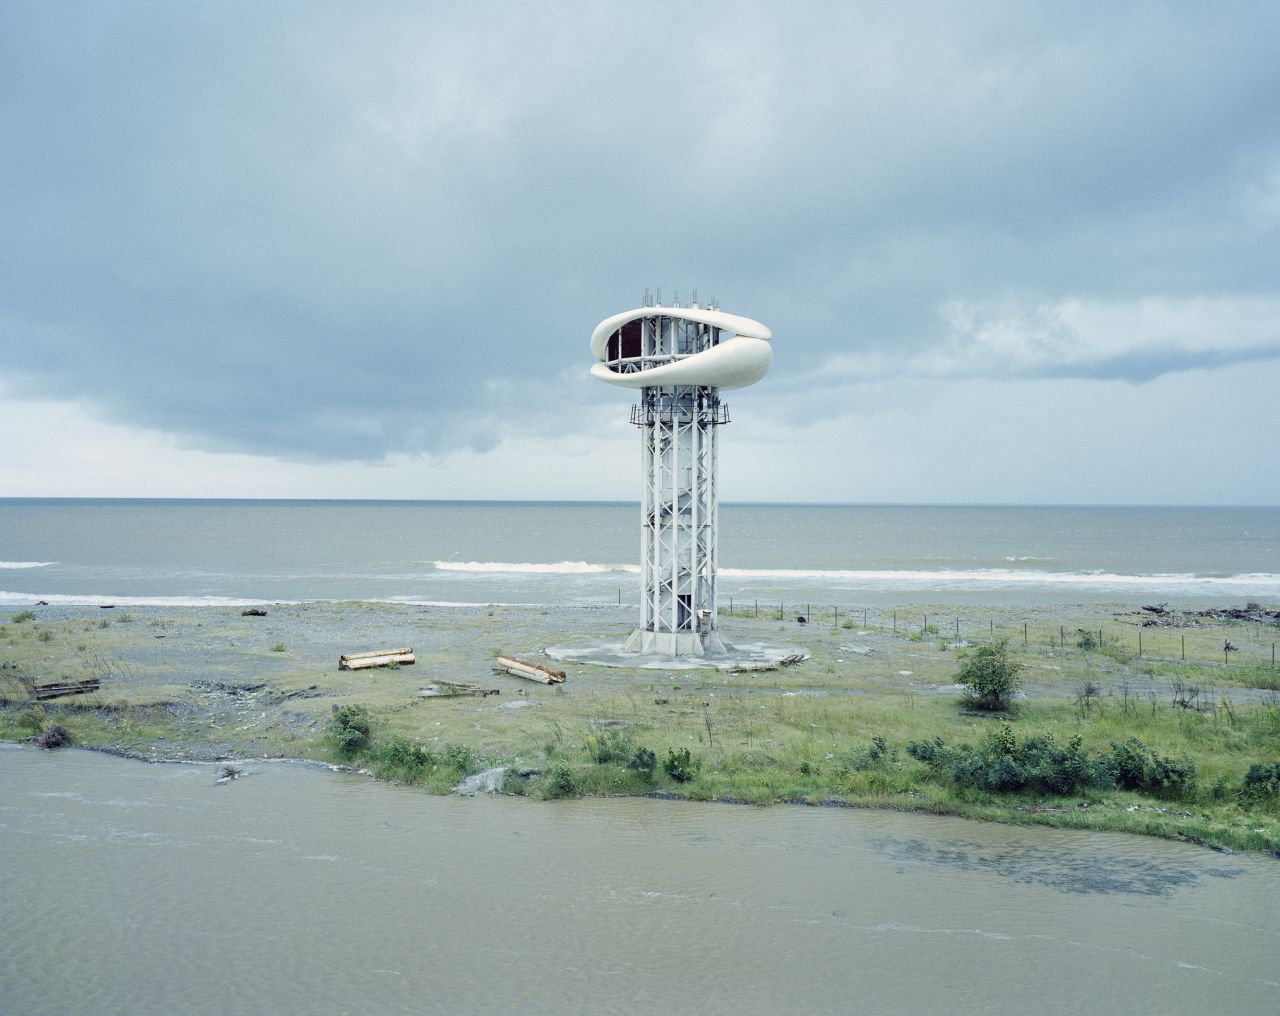 "Anaklia, Georgia" (2013) by Rafał Milach shows an unfinished viewing tower. In 2011, President Micheil Saakashvili announced that Anaklia would be transformed into a luxury resort, but this hasn't come to pass. 